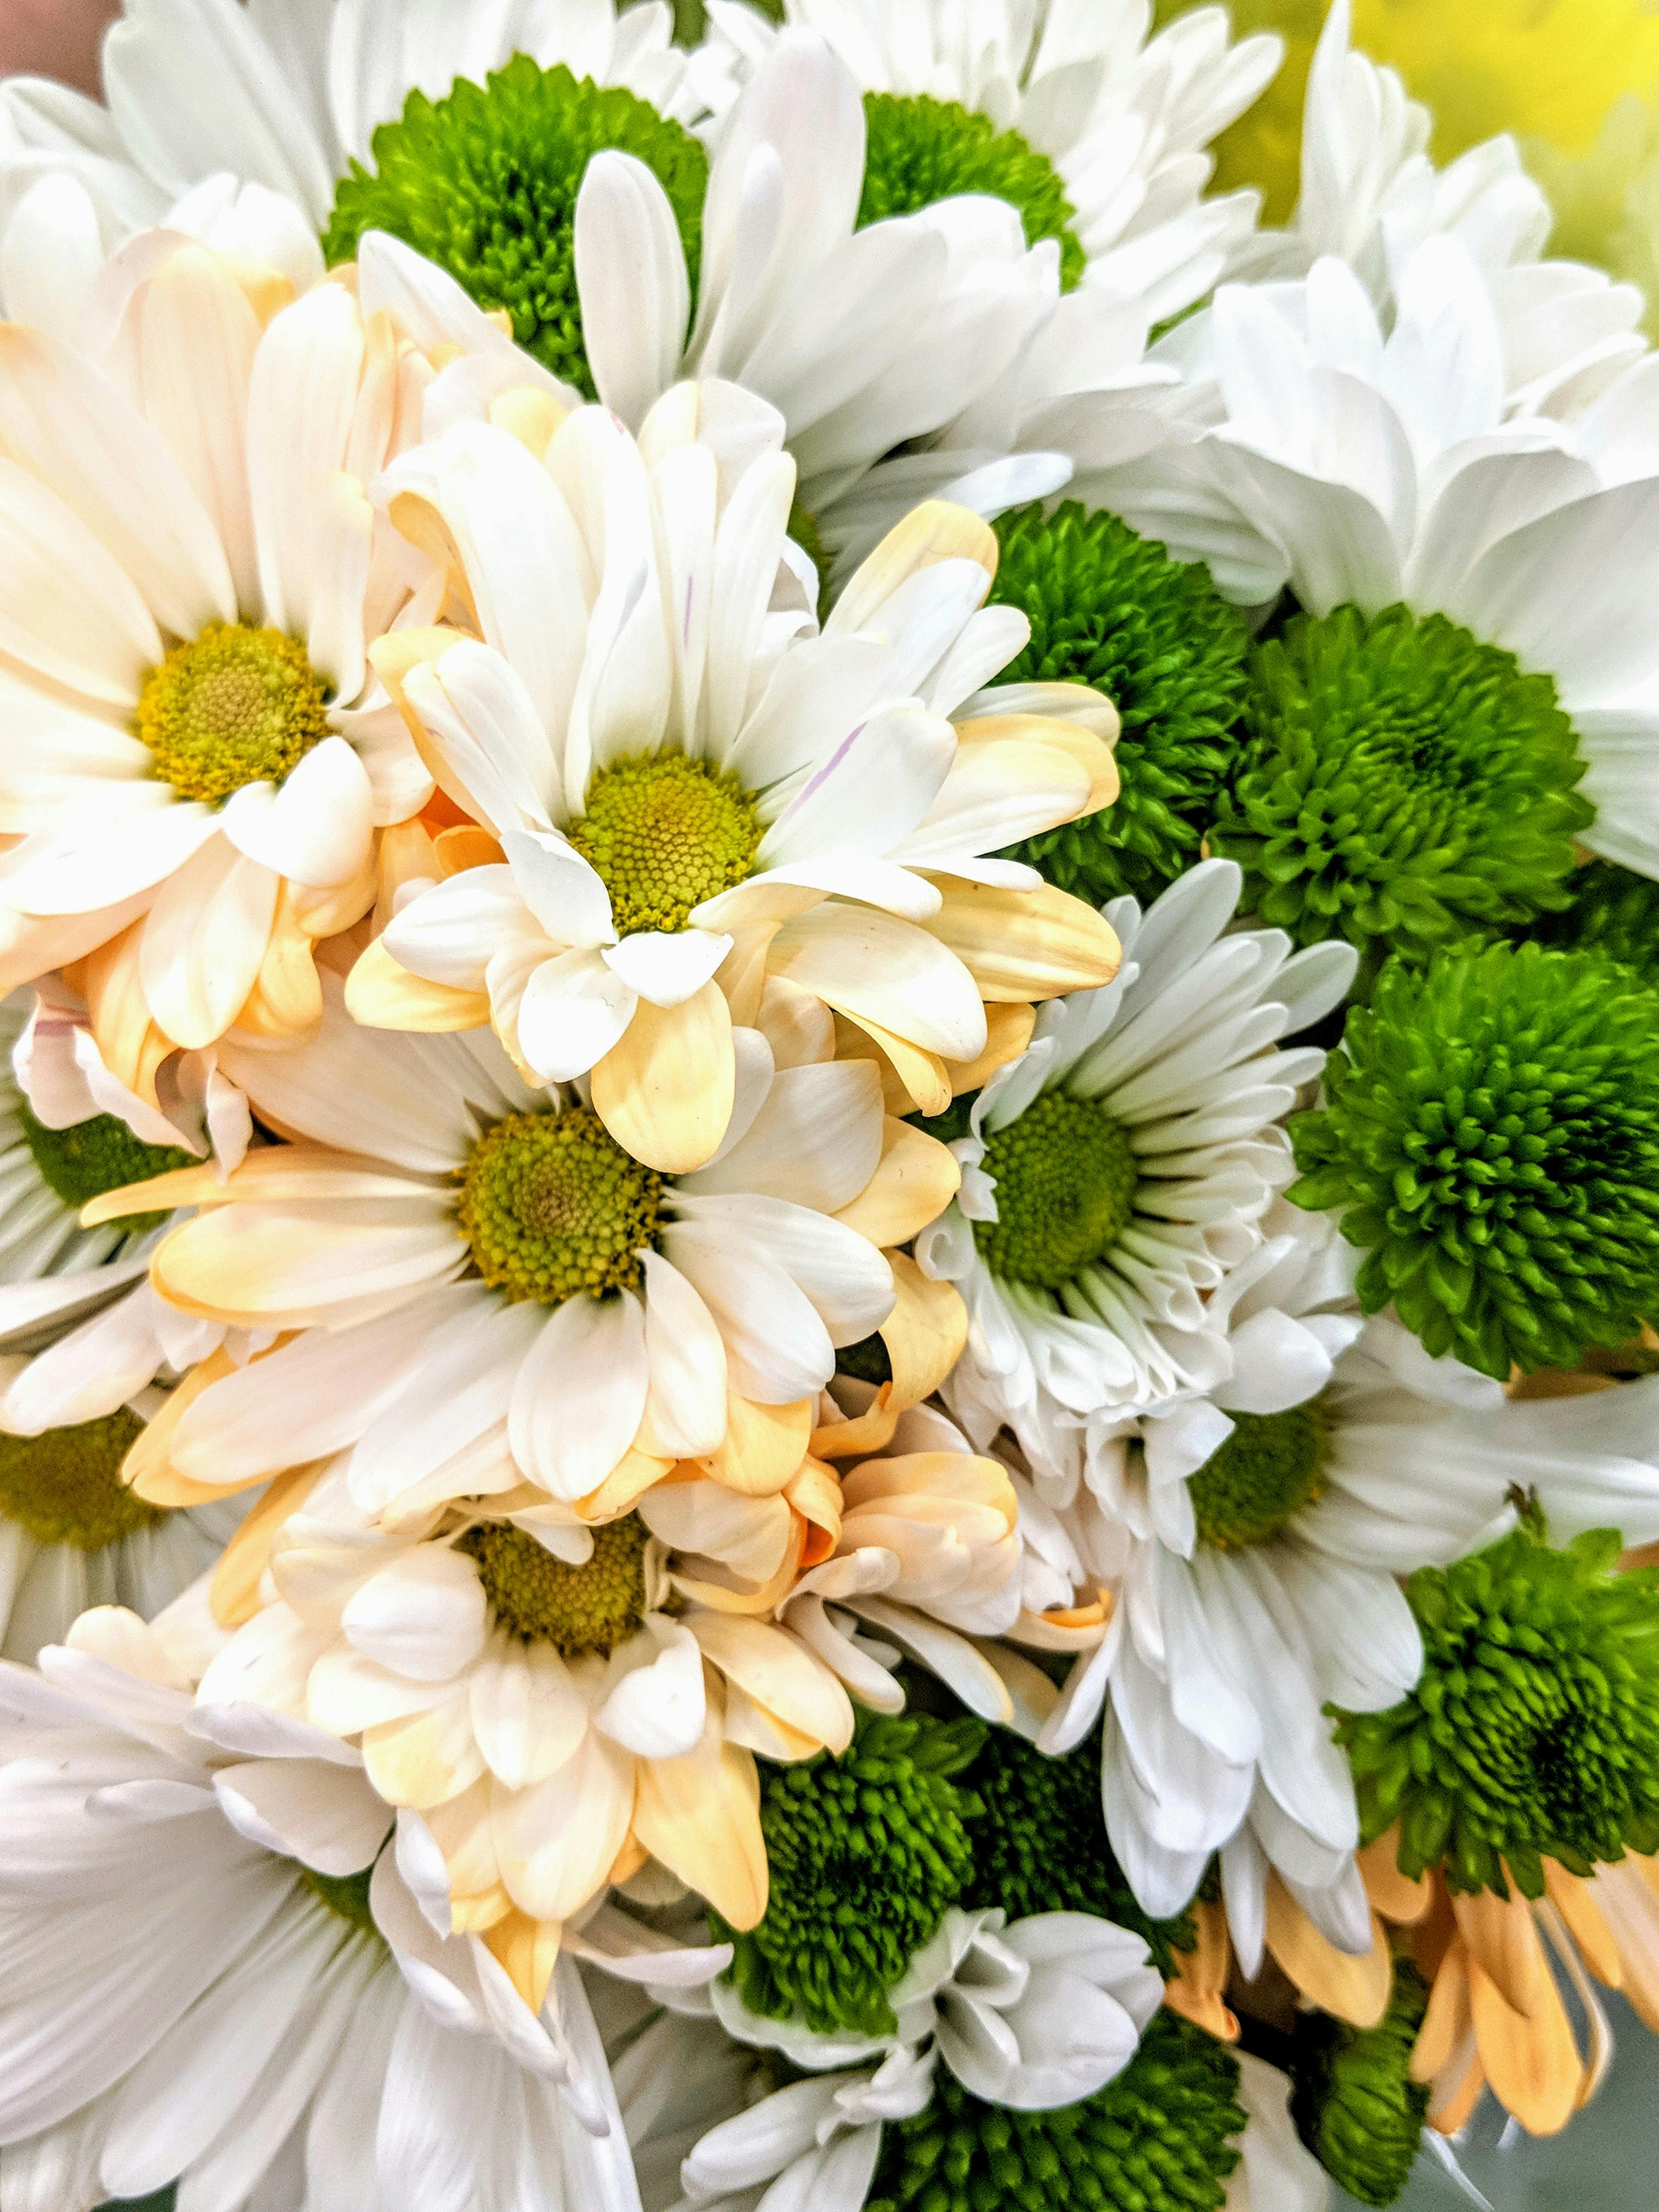 Free stock photo of bouquet, flowers, Mixed bouquet